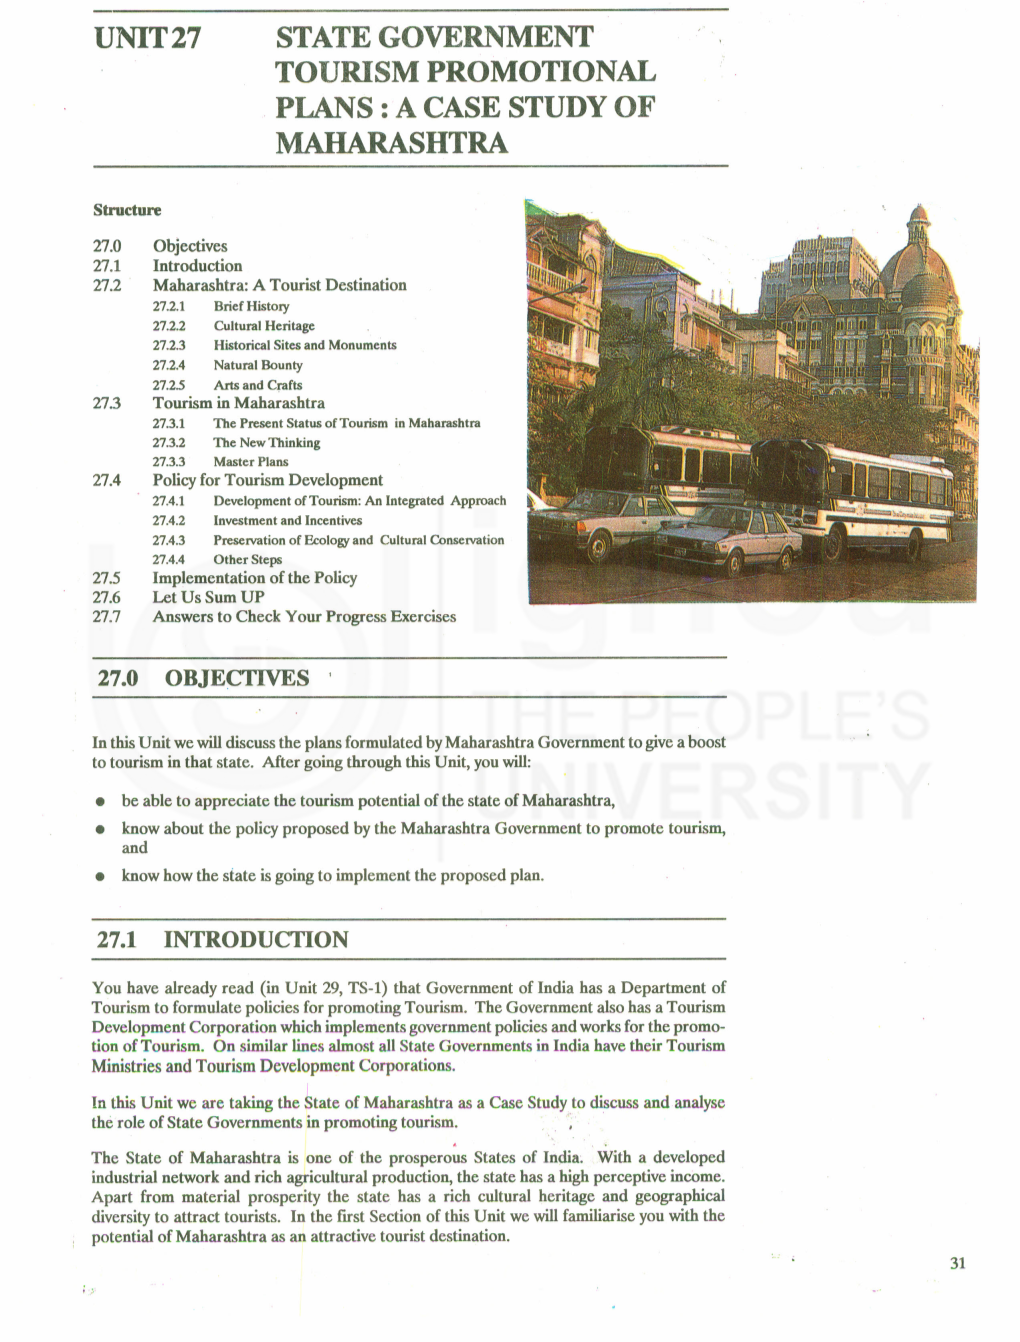 State Government Tourism Promotional Plans: a Case Study of Maharashtra